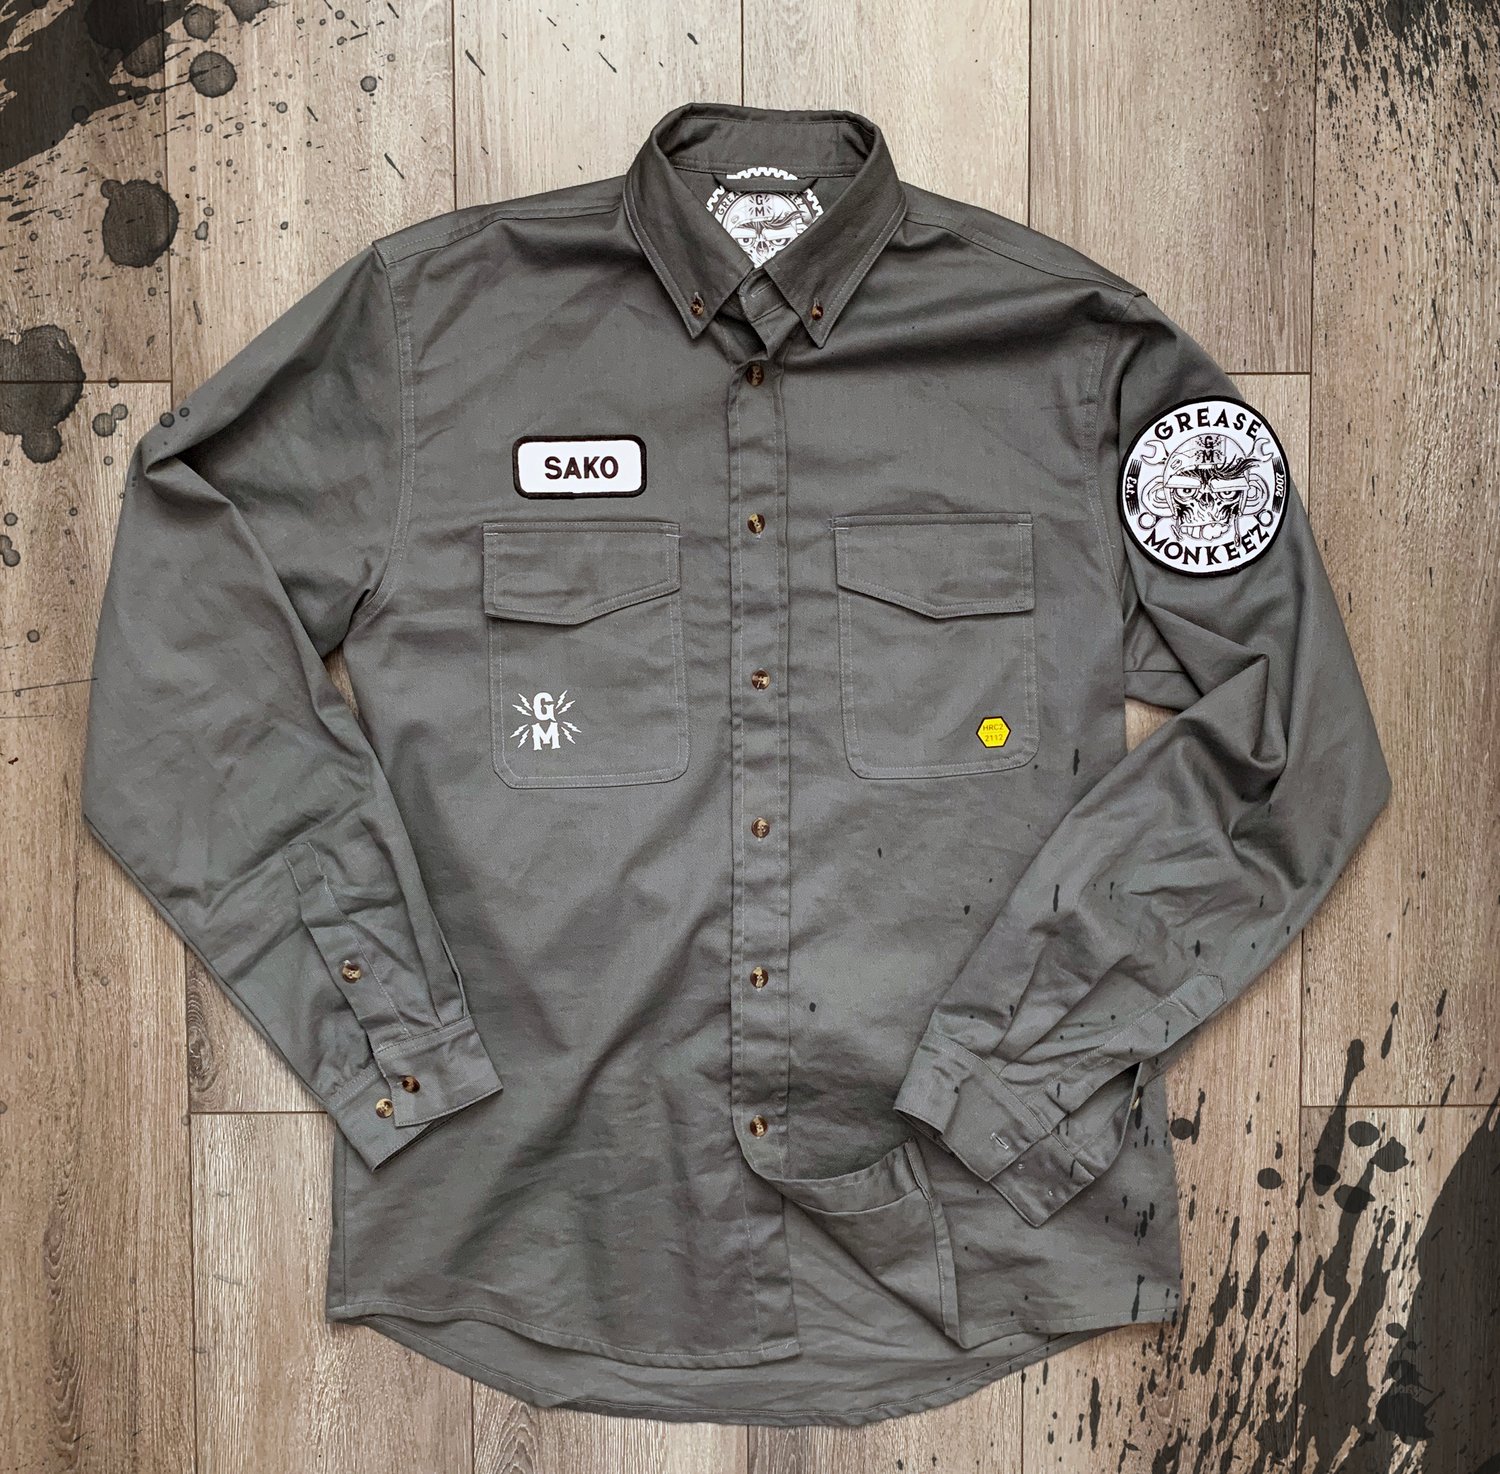 Grease Monkeez - Welding/Mechanic Button Down Shirt with name patch ...